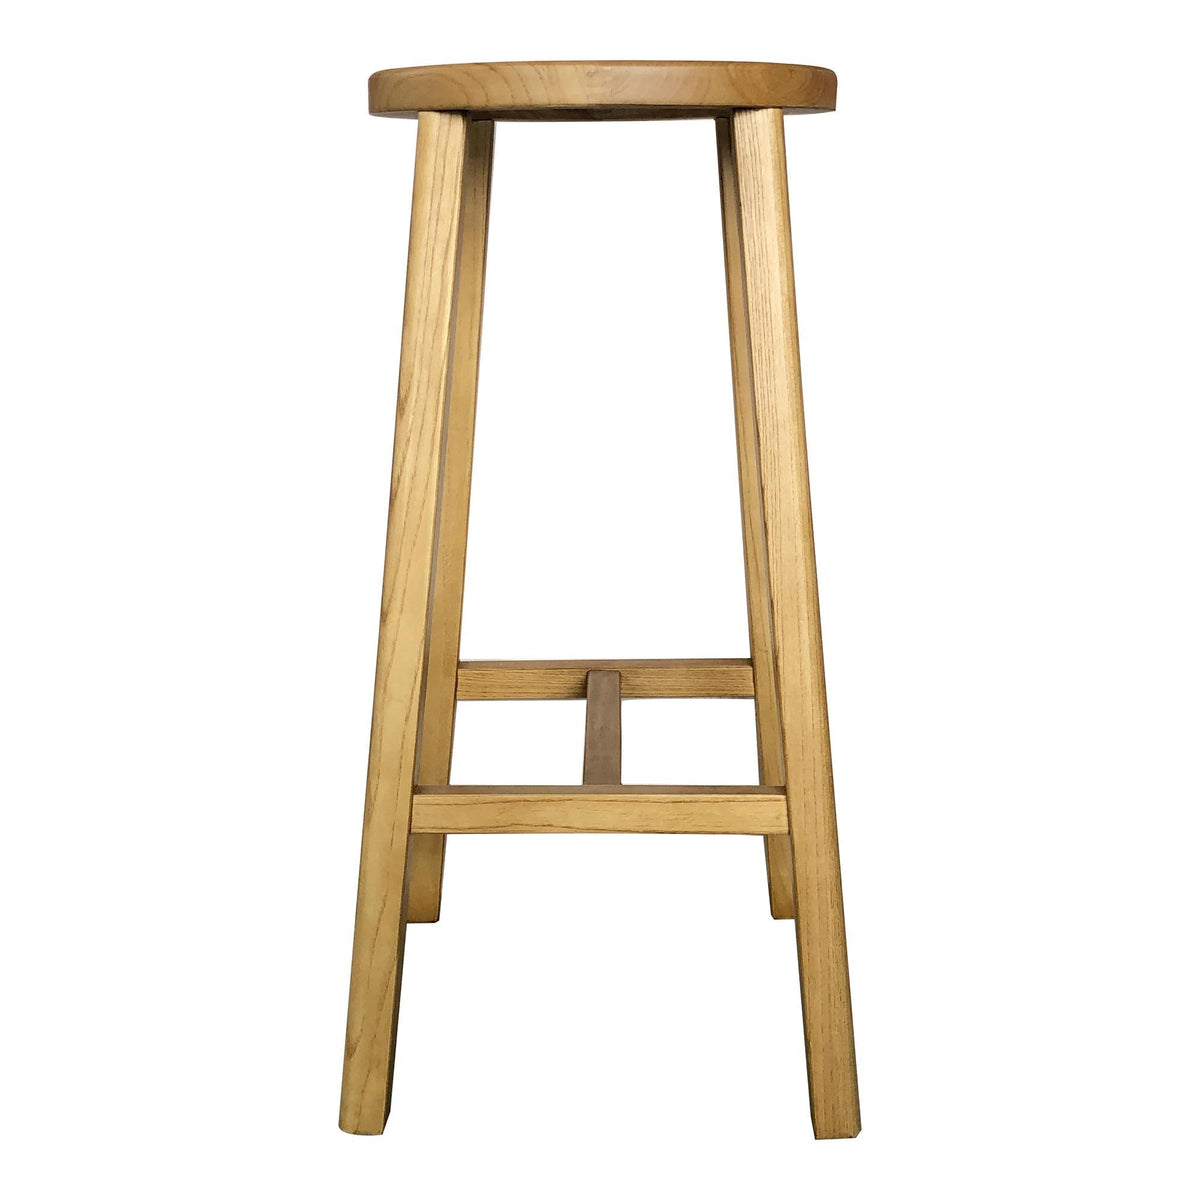 Moe's Home Collection Mcguire Barstool Natural - FG-1025-24